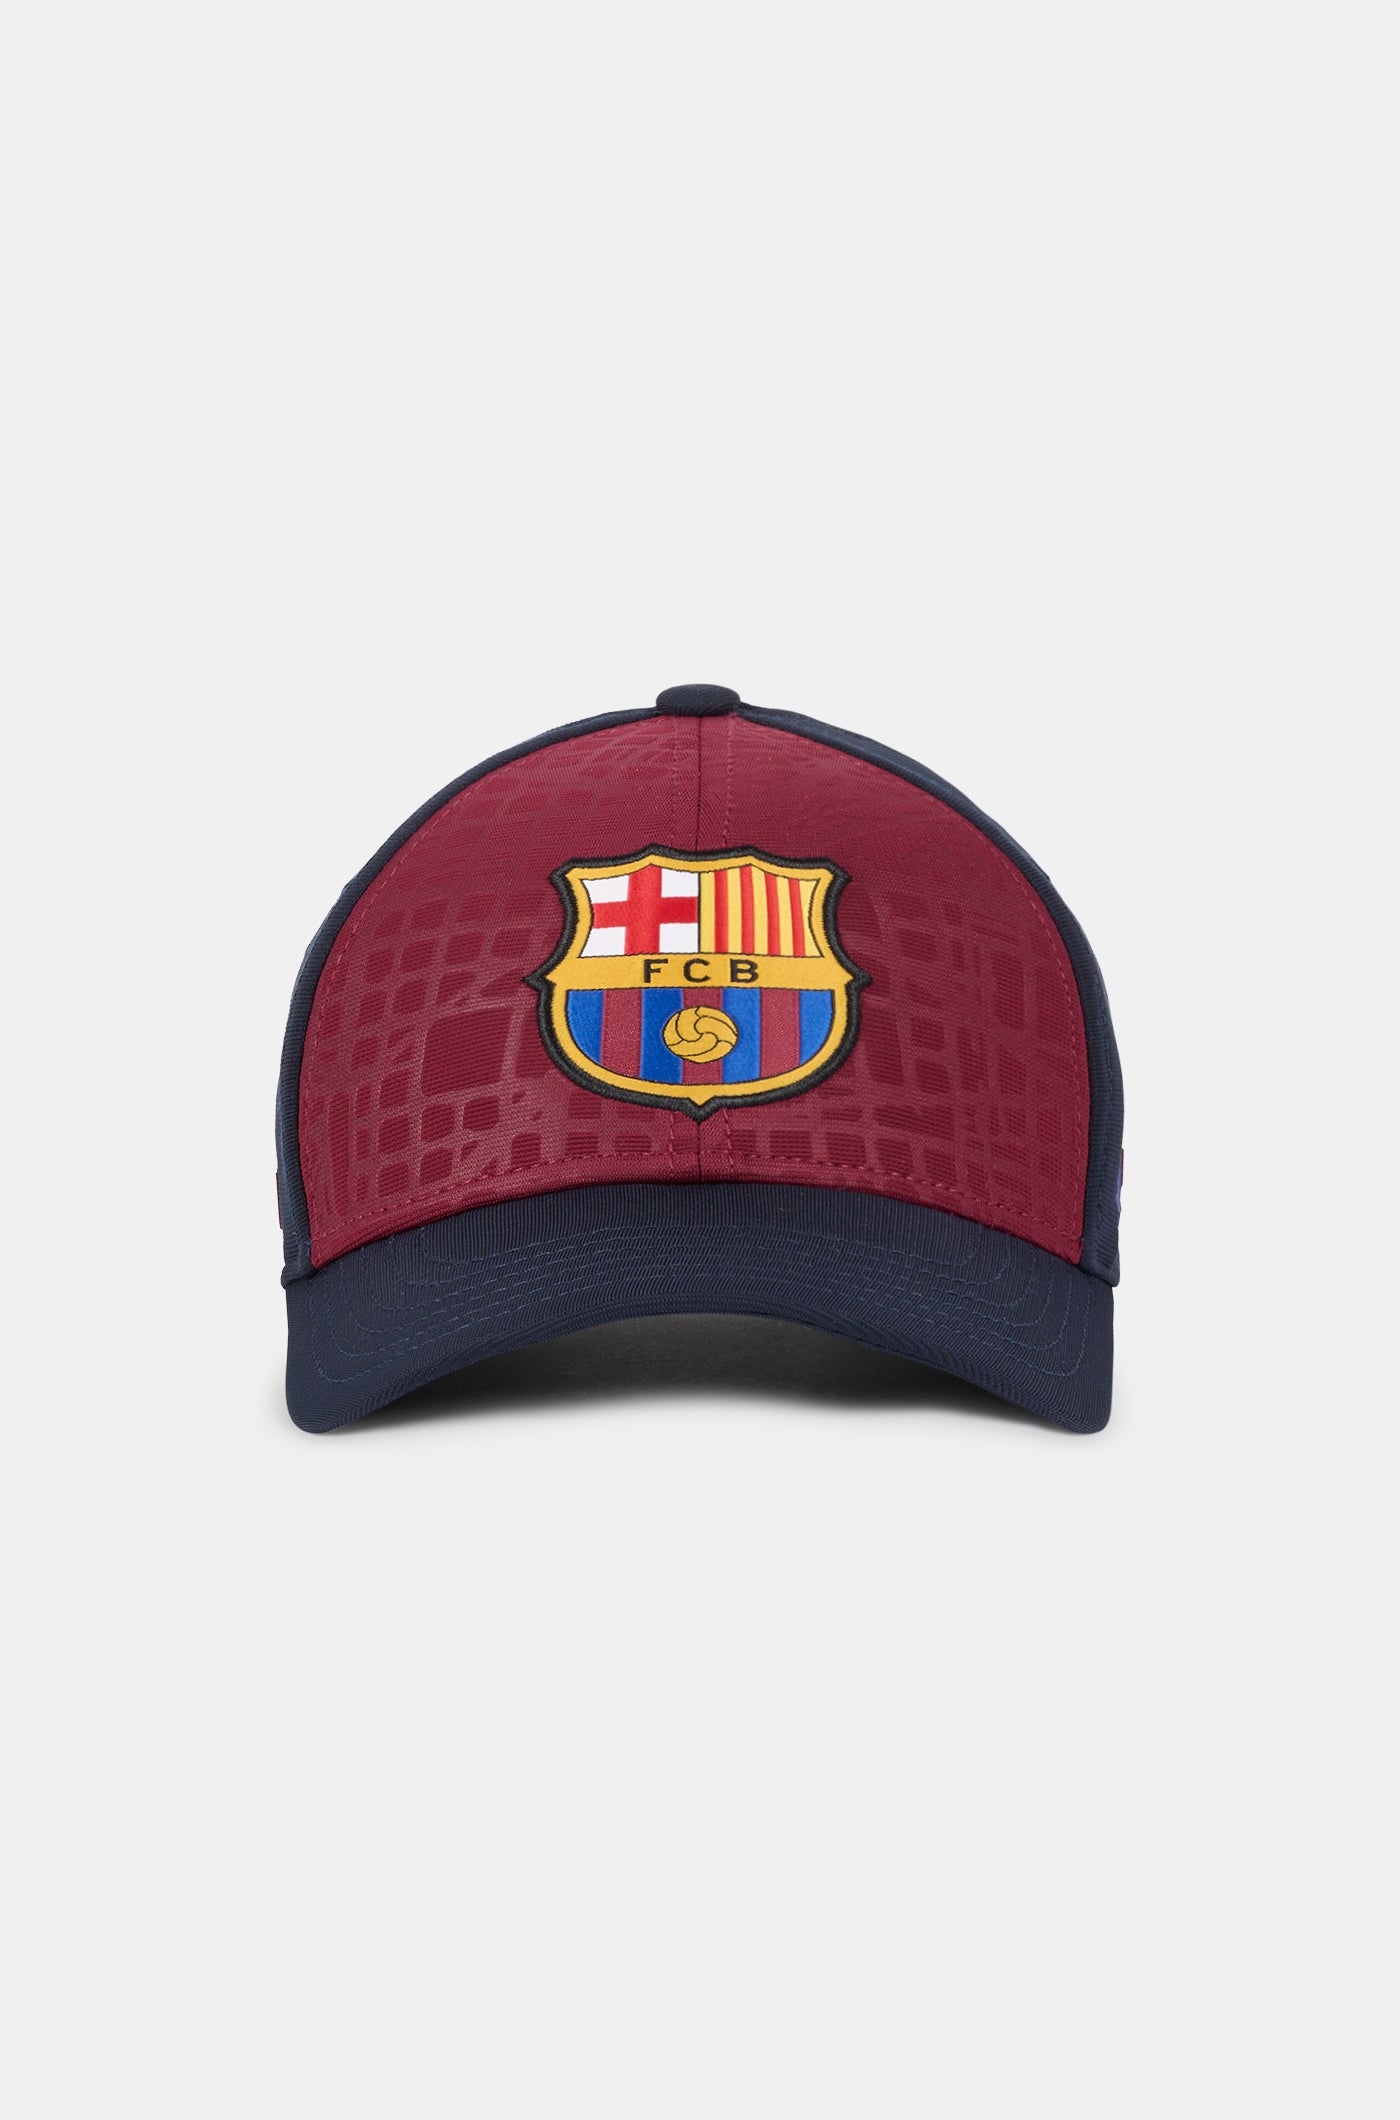 FC Barcelona cap with crest 1899